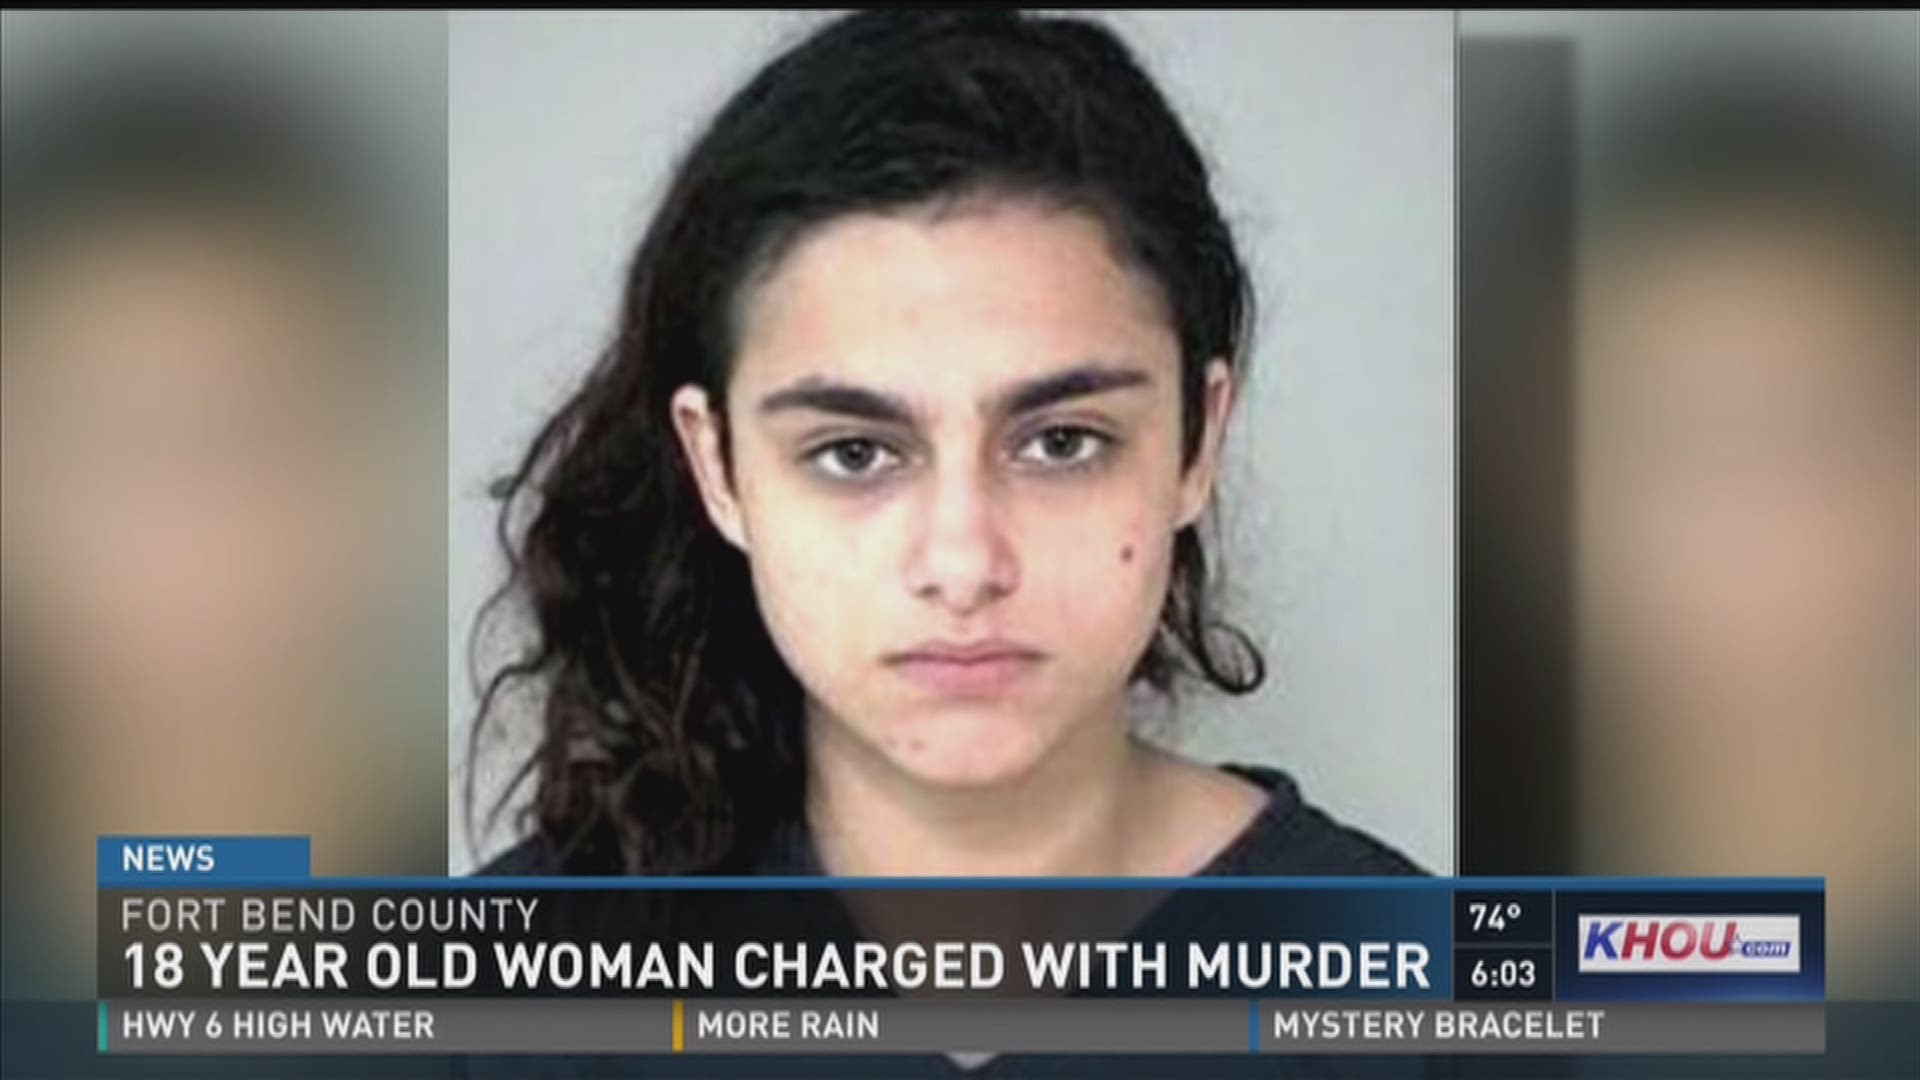 An 18-year-old woman was arrested and charged with murdering a man at a Cinco Ranch home in March.